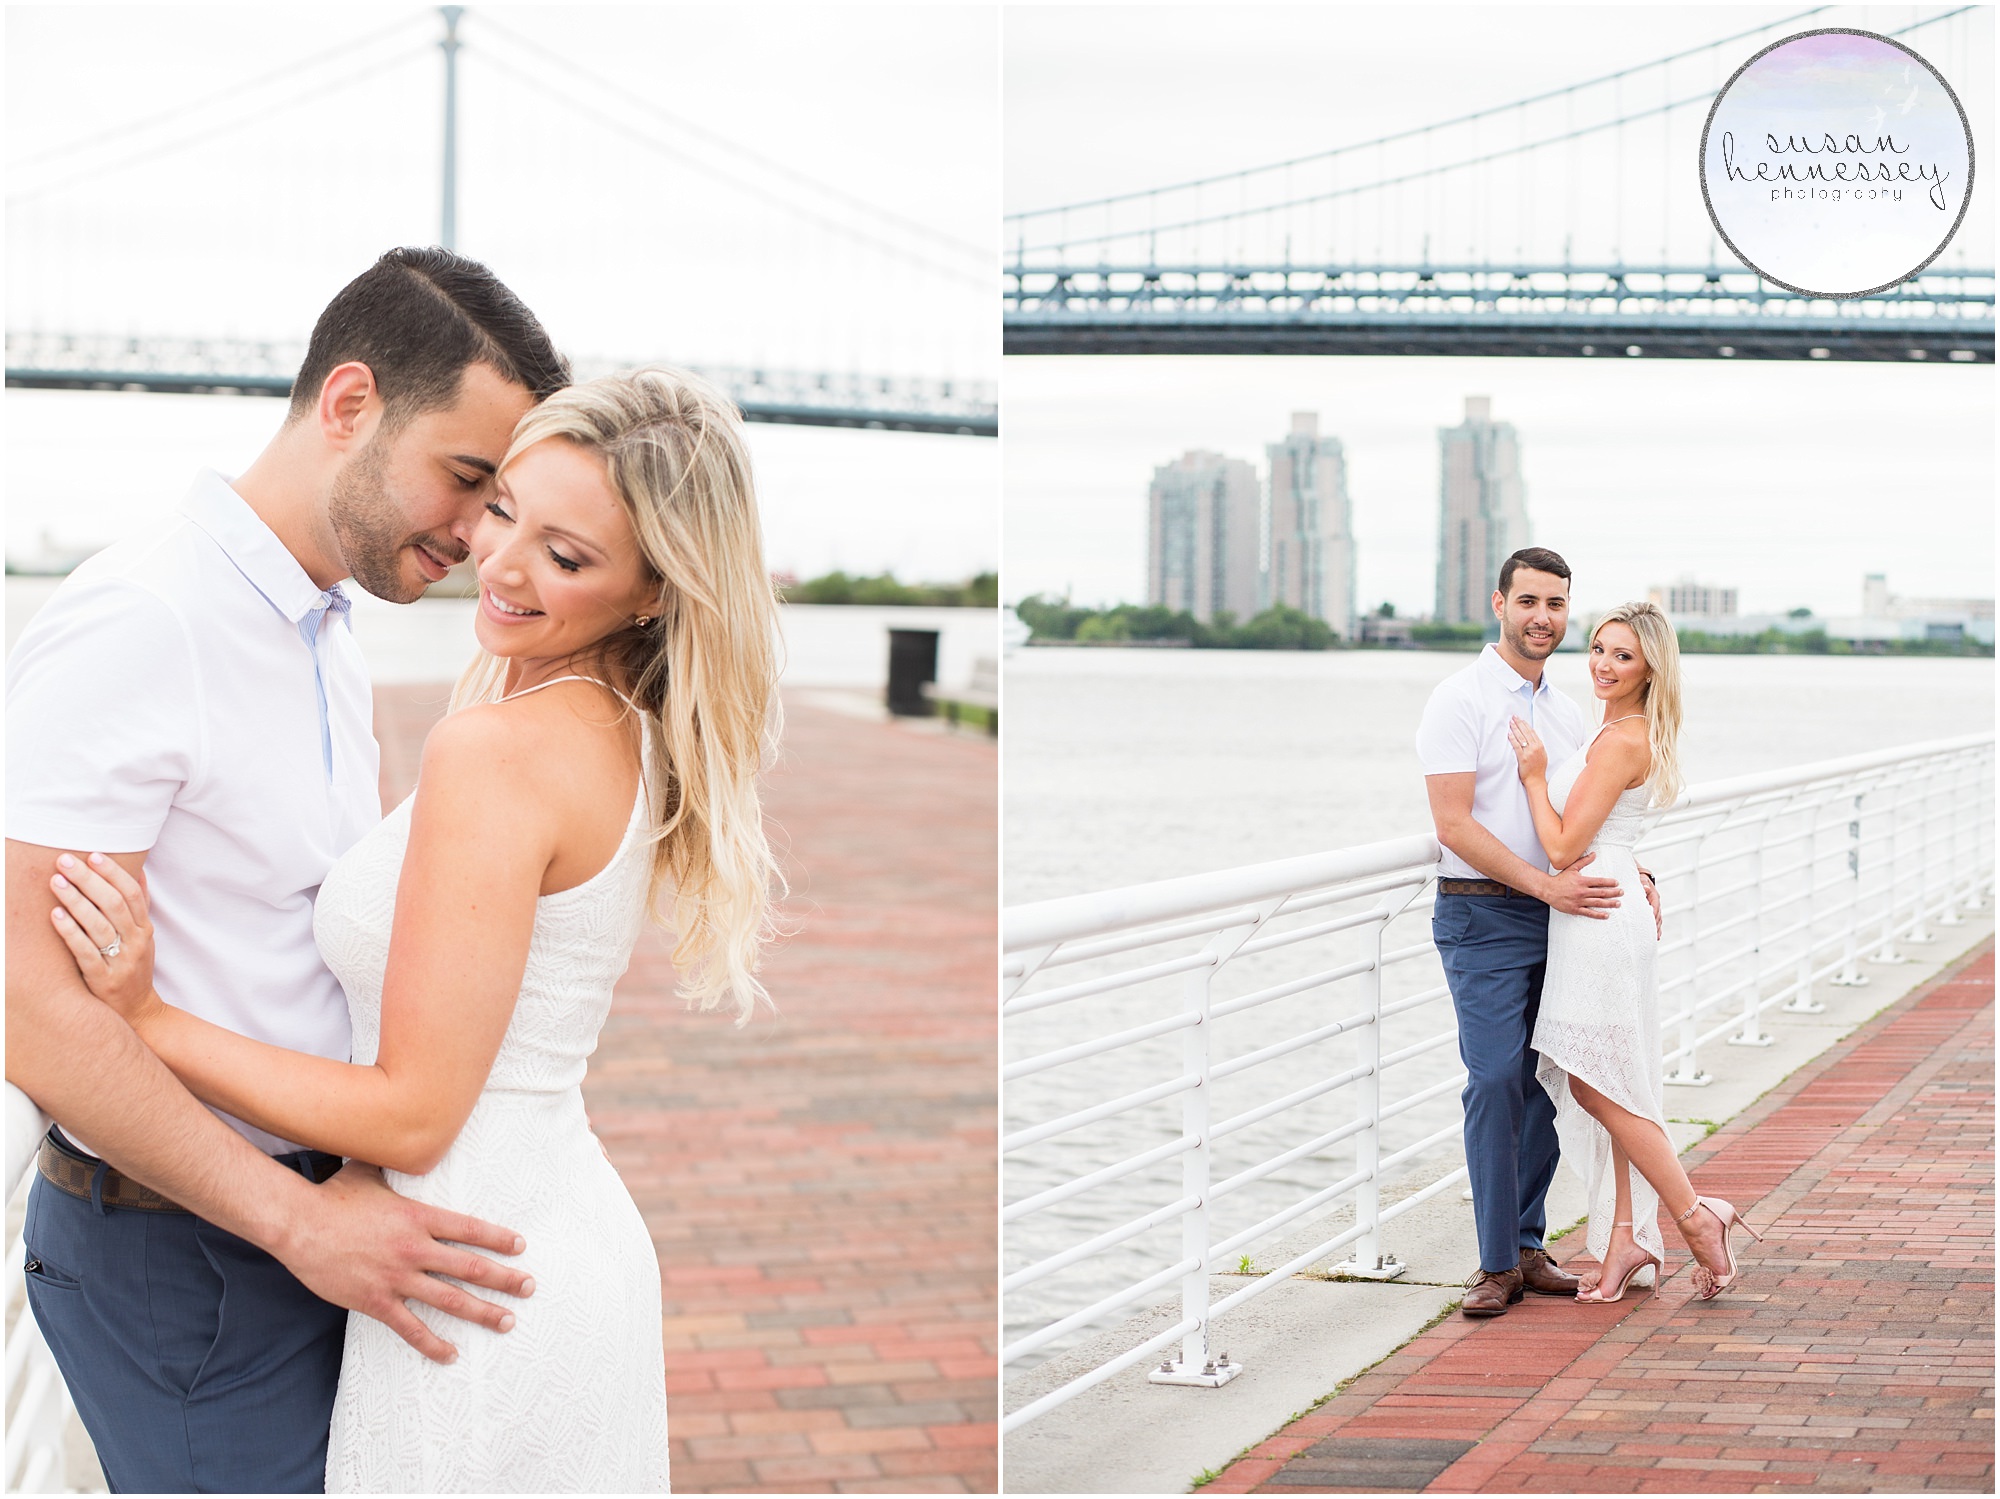 Engagement Session on the River overlooking the Benjamin Franklin Bridge